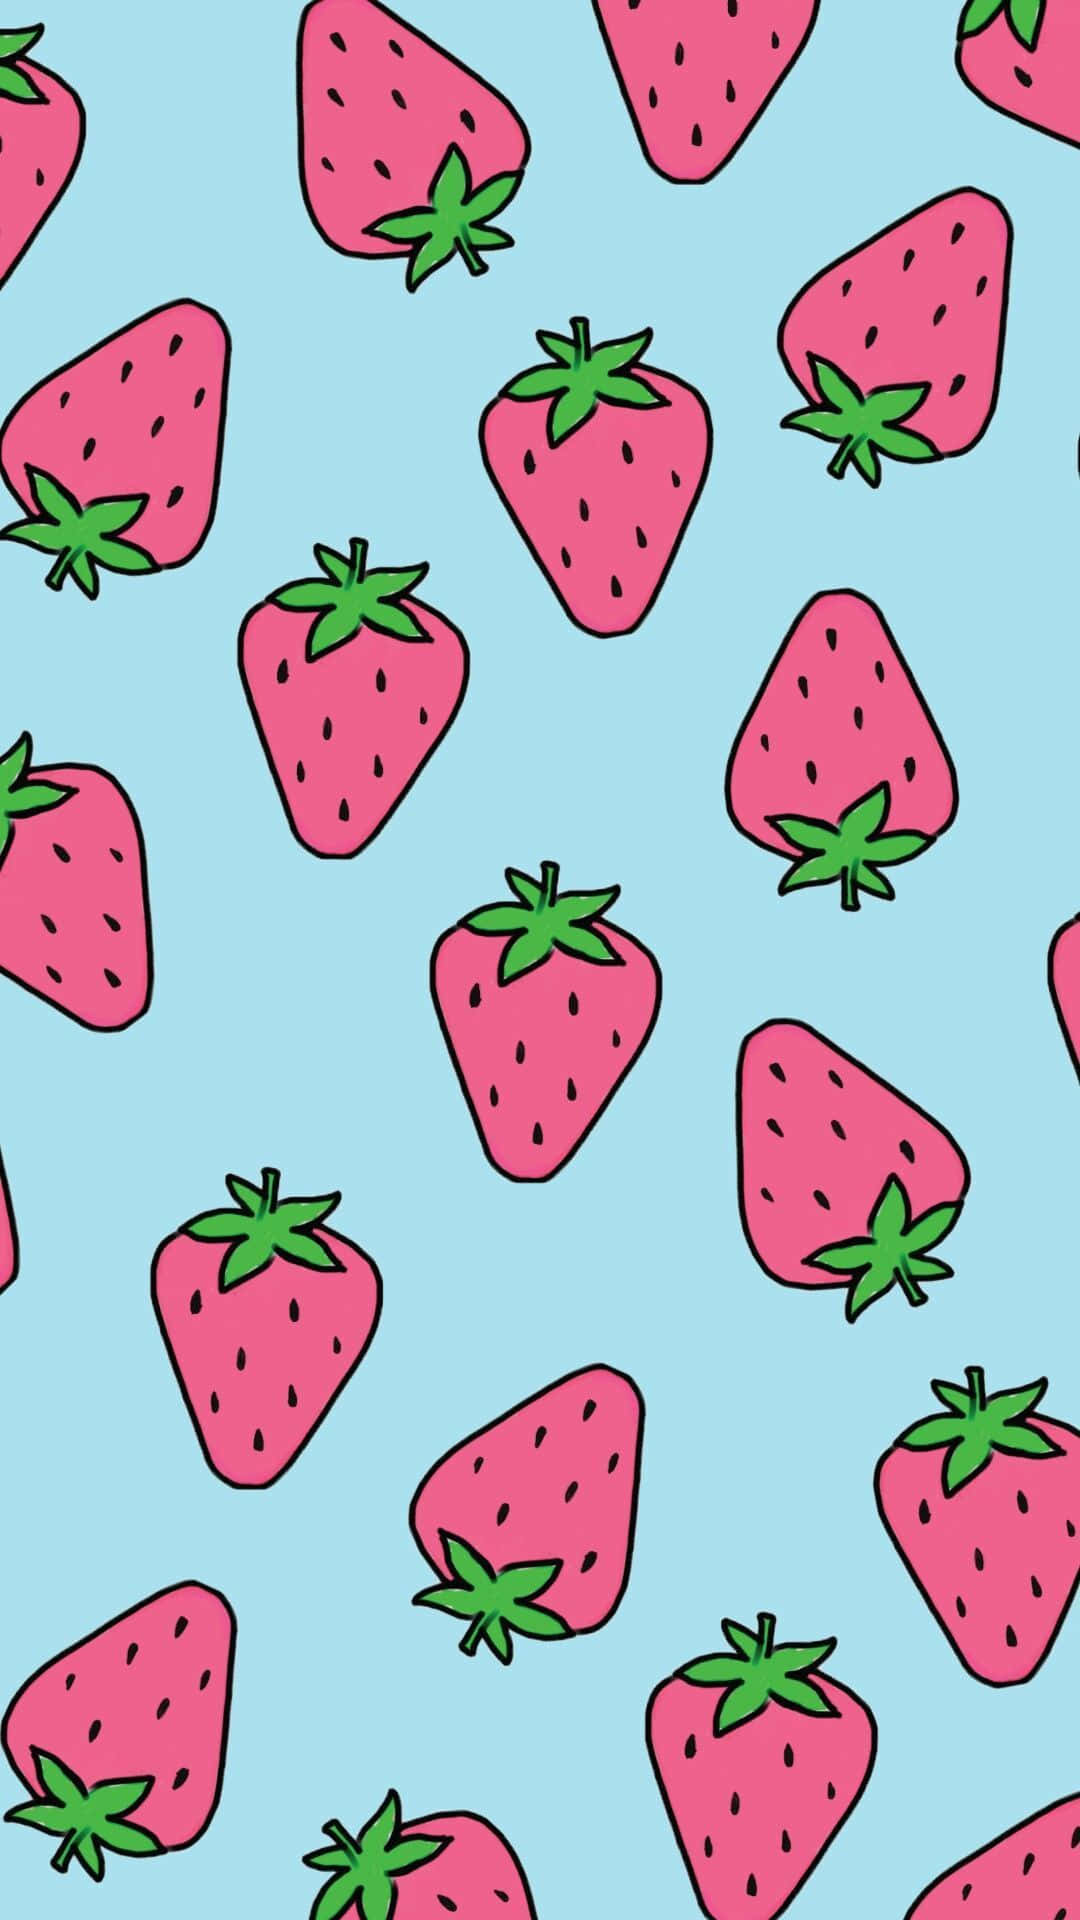 Scrumptious Fields Of Red - Cute Strawberry Themed Wallpaper